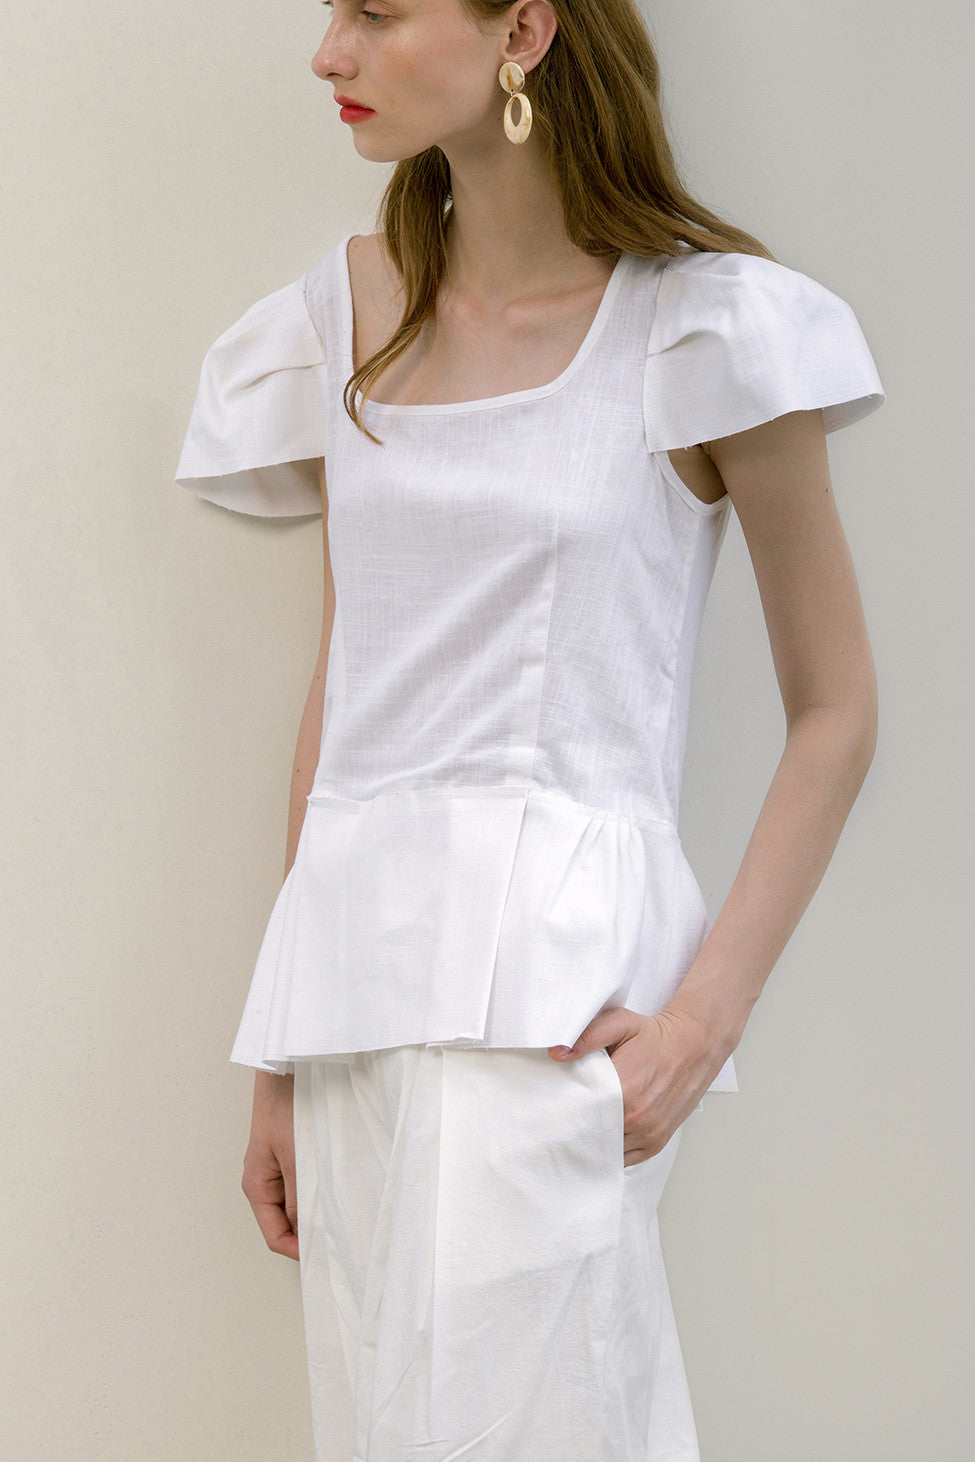 The Rosario Top in White featuring square neckline, cap short sleeves. Pull on. Relaxed fit.  